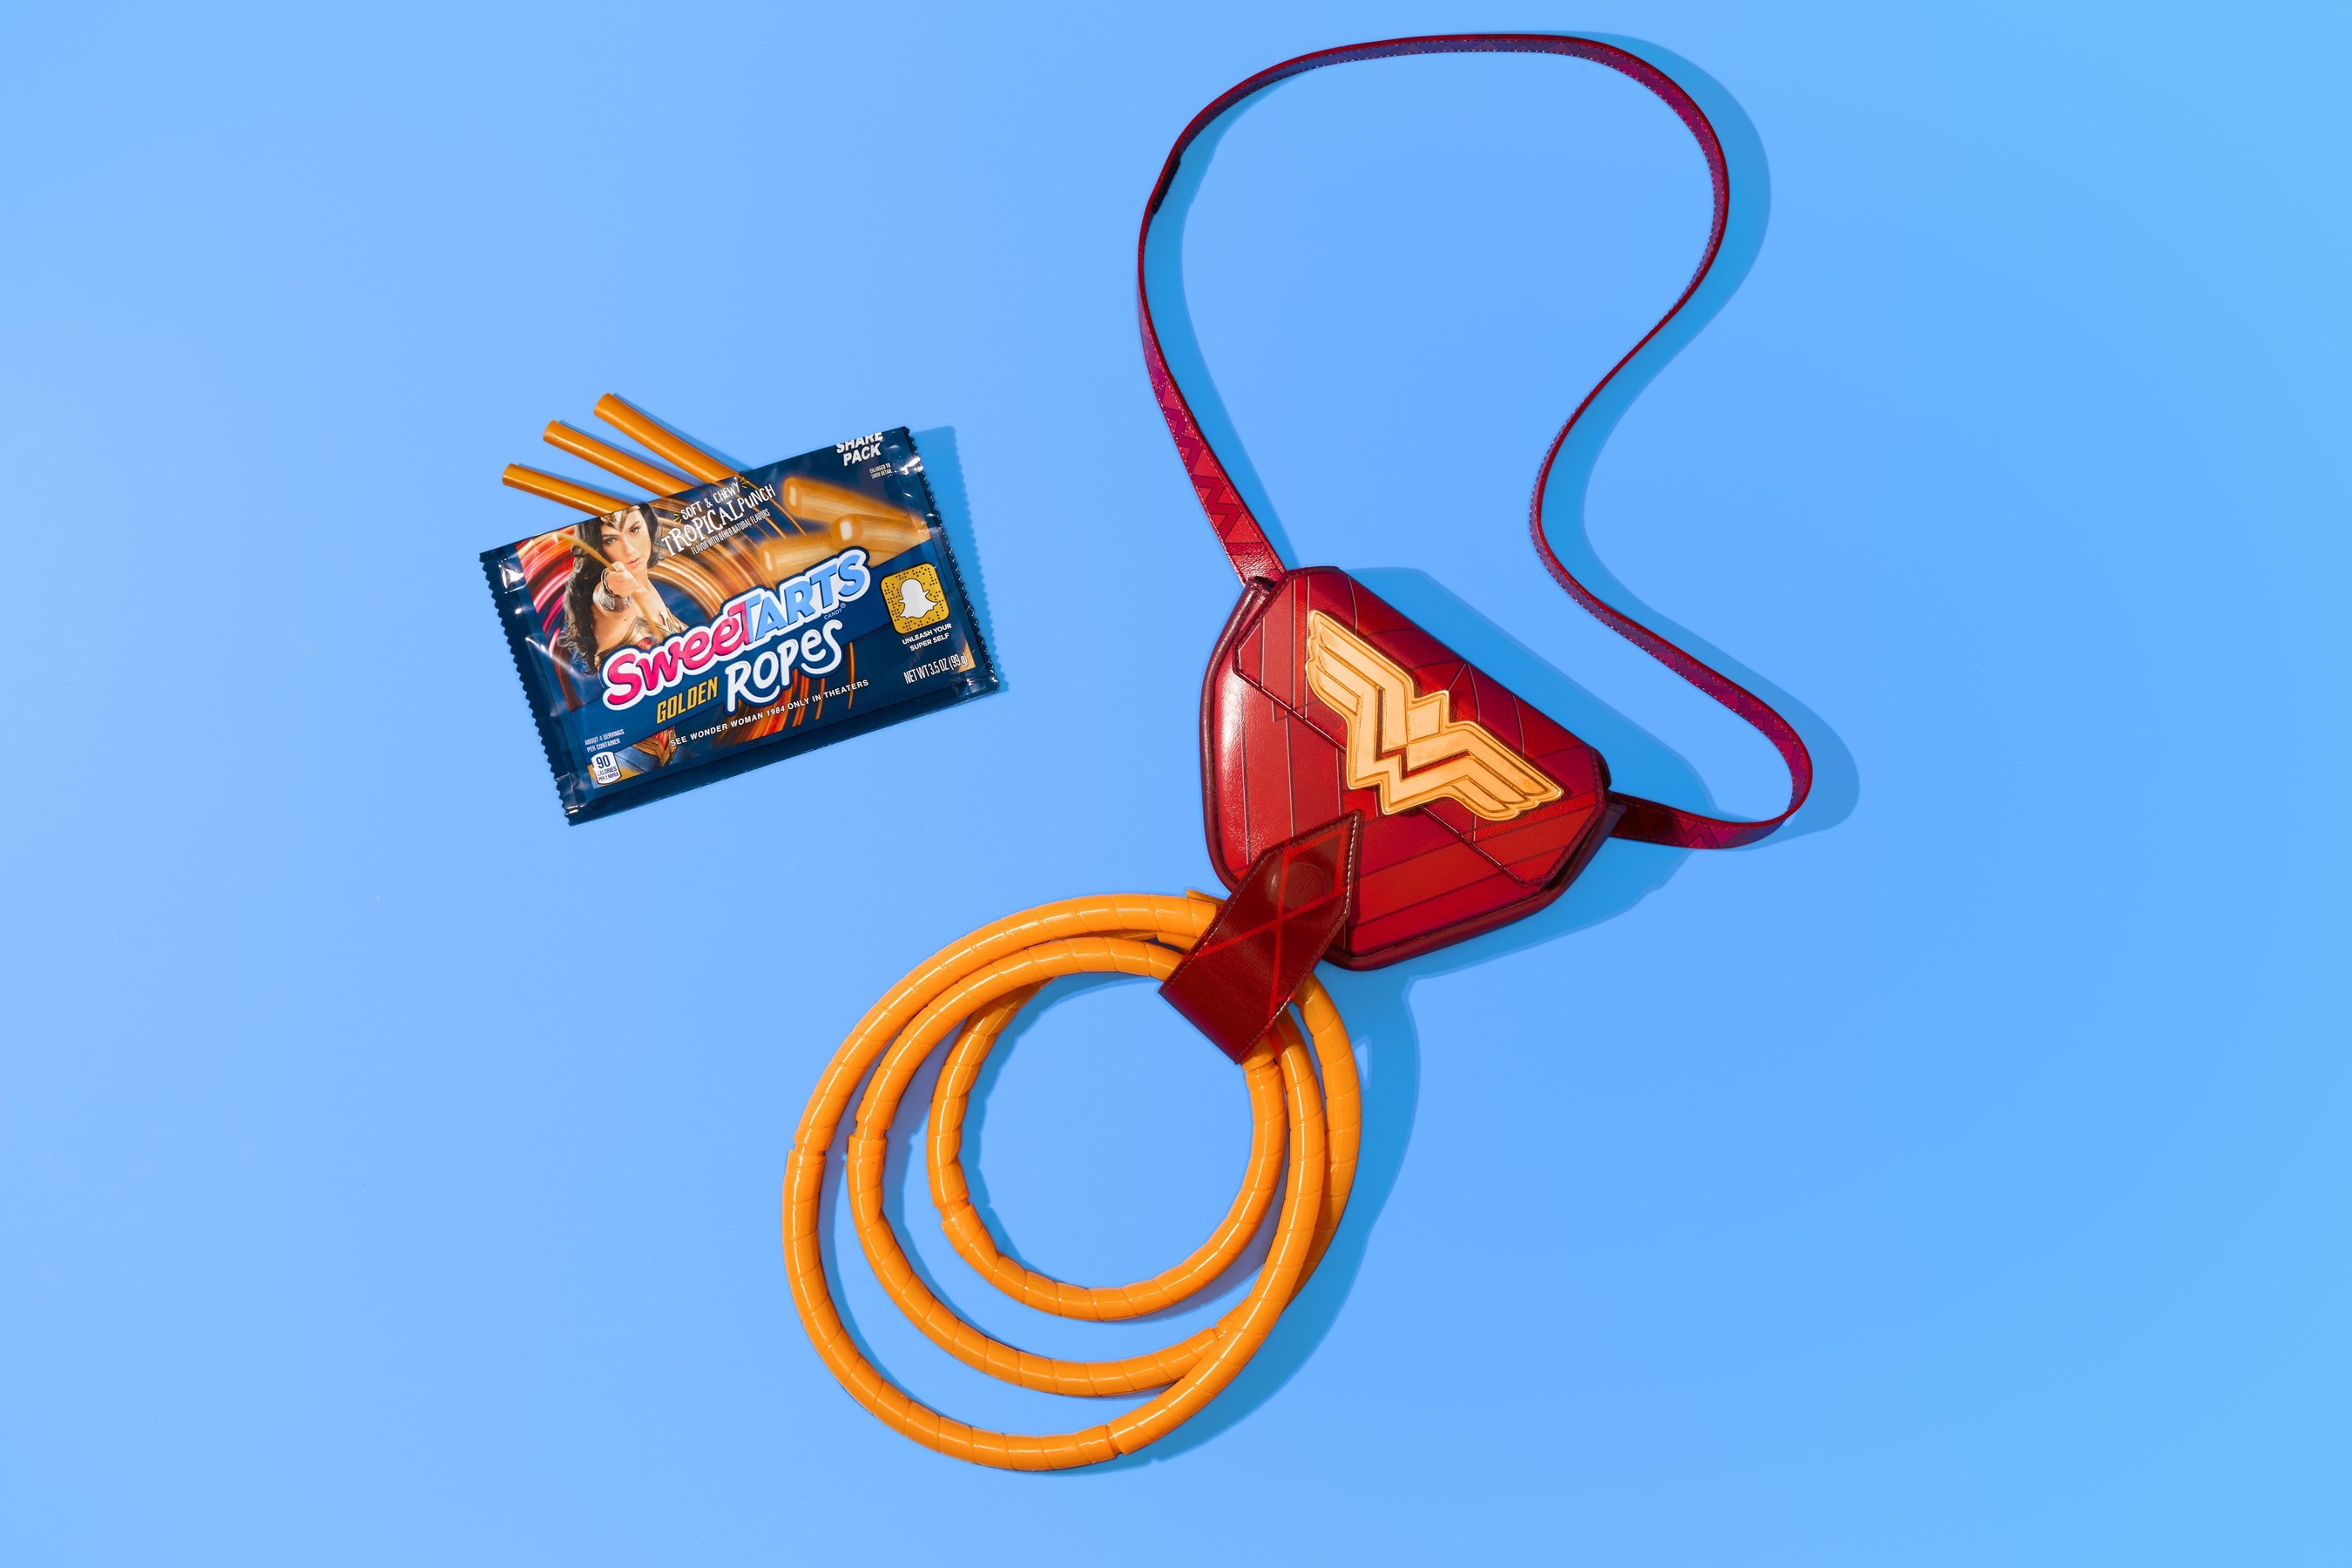 Sweetarts Celebrates Wonder Woman 1984 Partnership With Exclusive Candy Dispenser For Brand S Limited Edition Golden Ropes